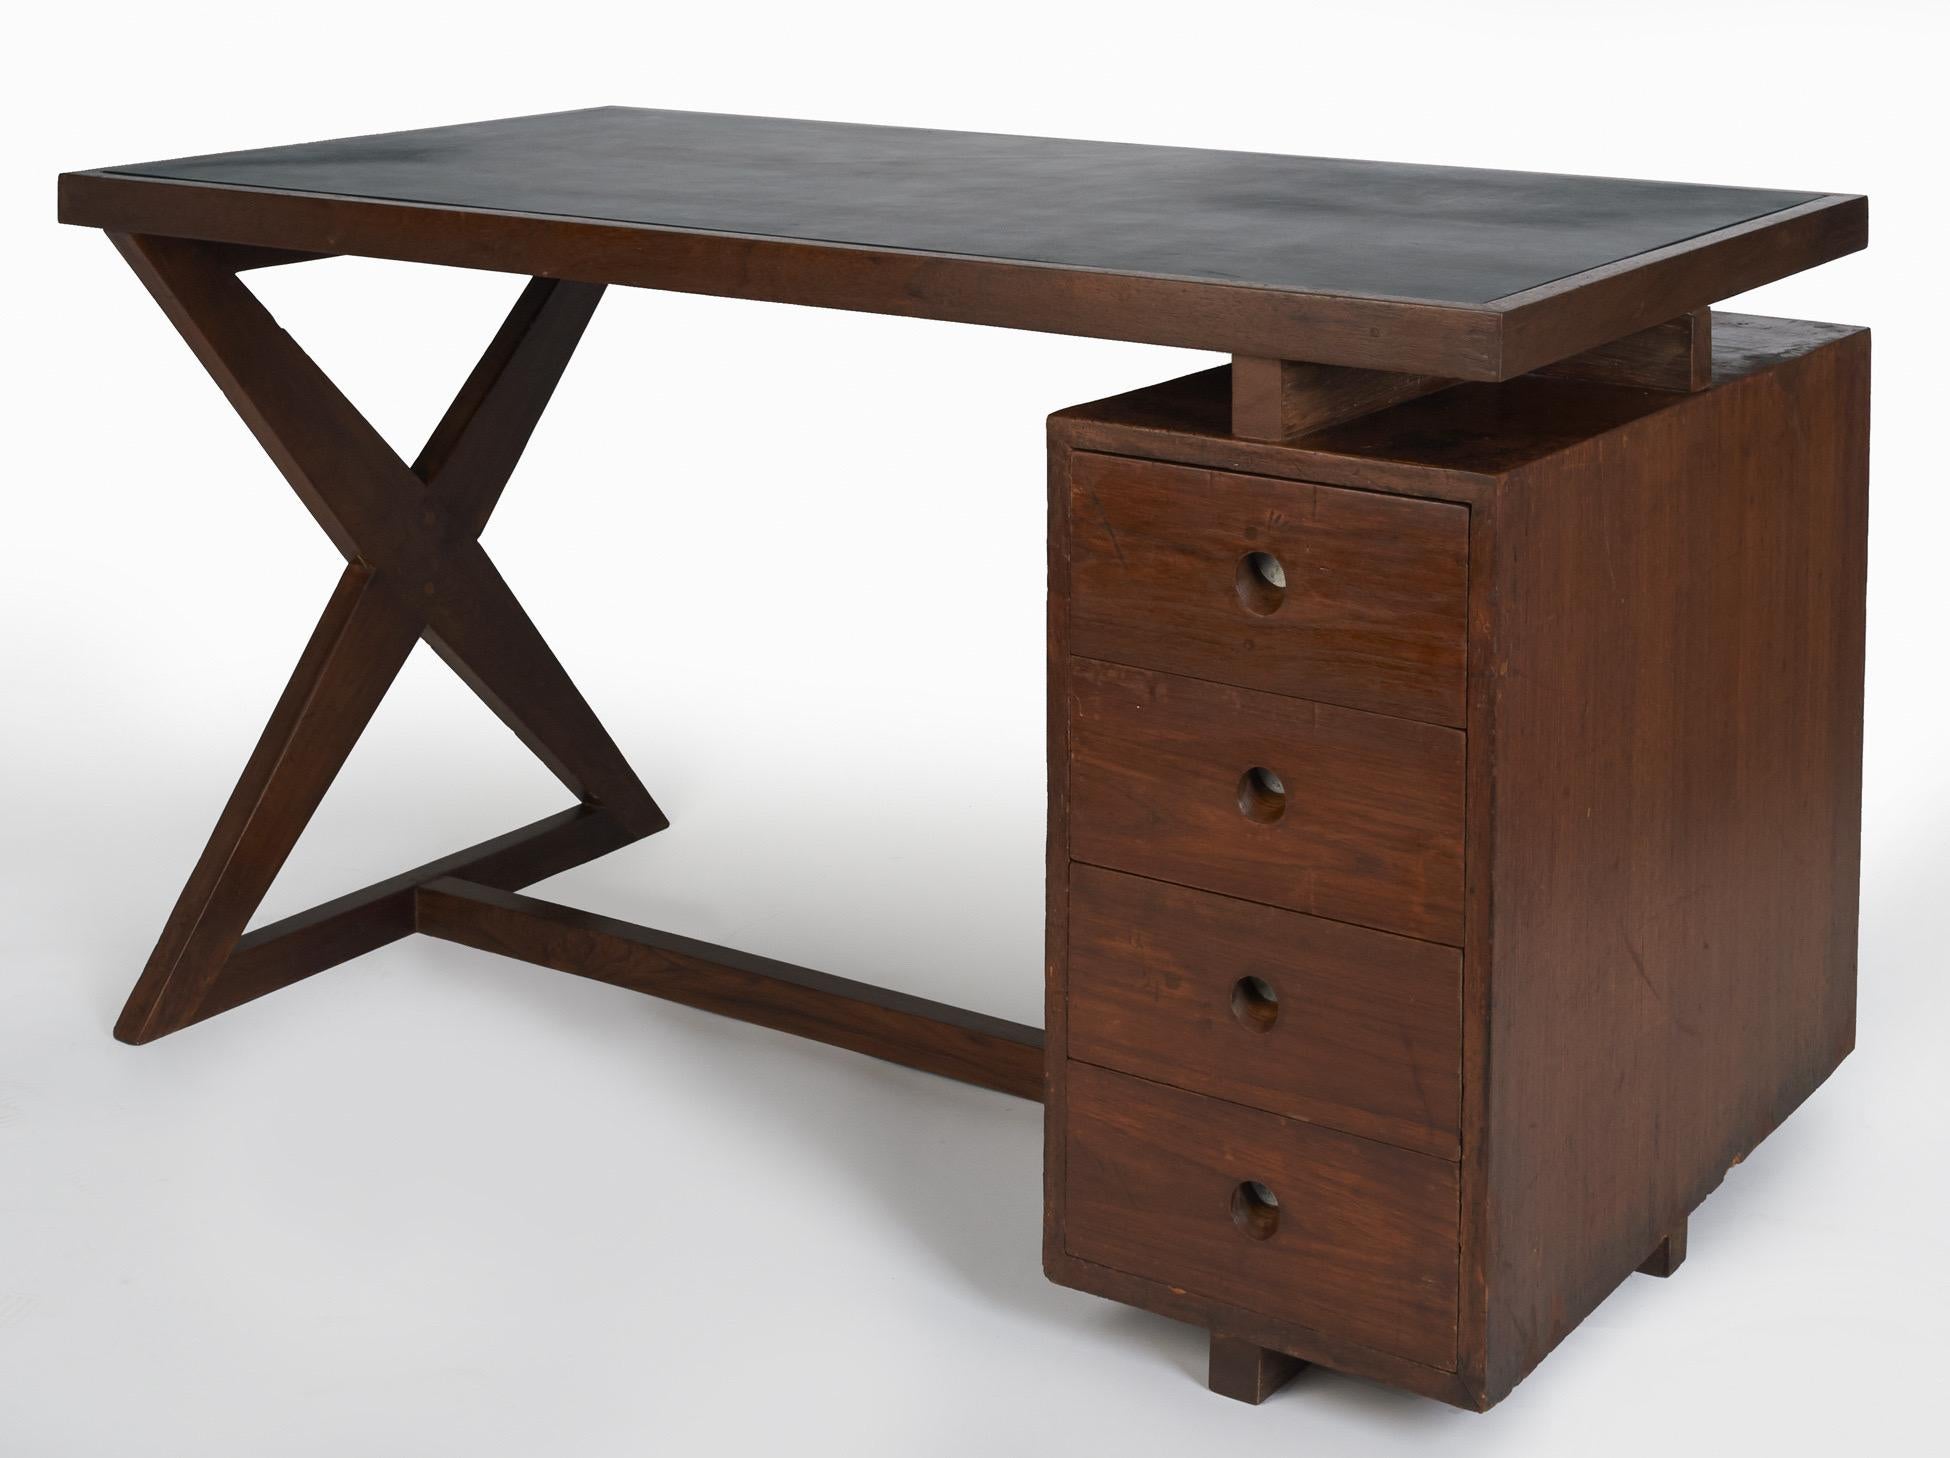 Pierre Jeanneret (1896-1967)

A rare and spectacular four-drawer bureau in teak by Pierre Jeanneret for the civic buildings in Chandigarh, India, designed by Le Corbusier. A stunning and uncommon work, the floating desk features a highly